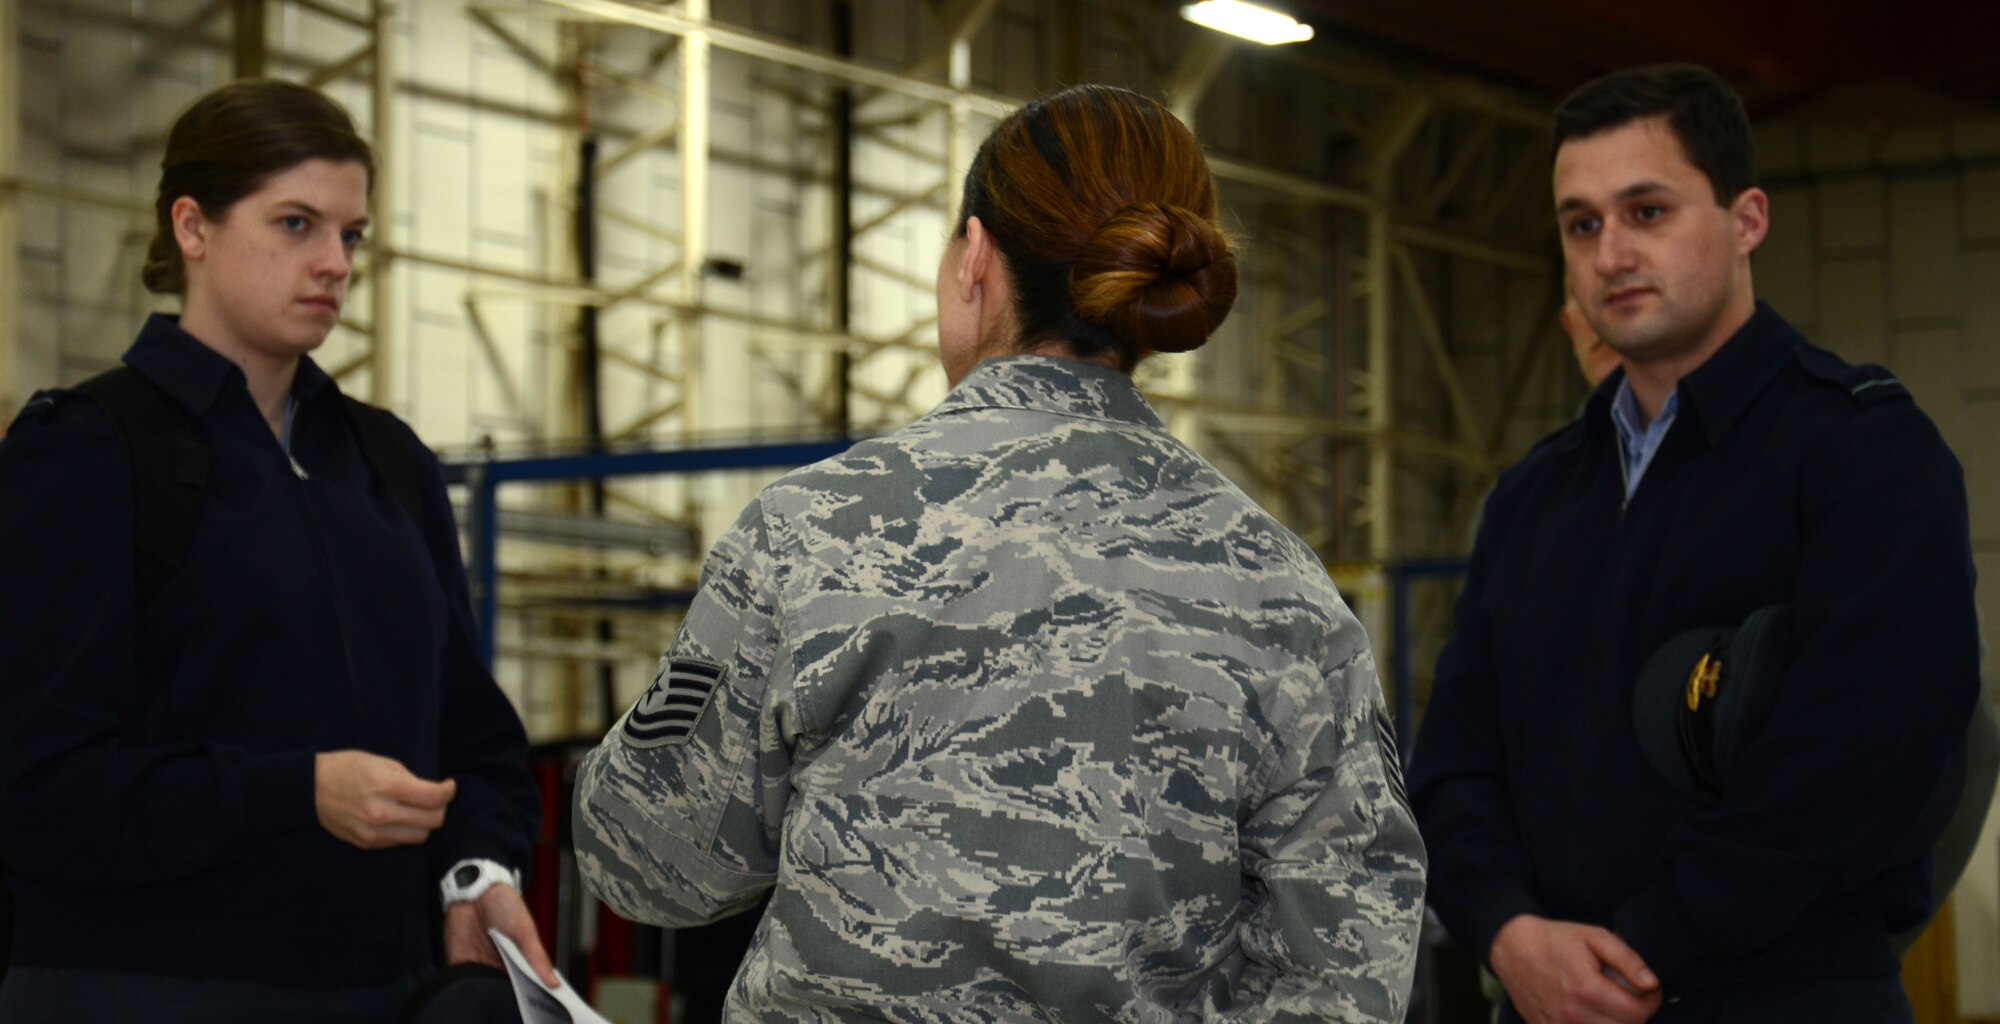 U.S. Air Force Tech. Sgt. Amy Chandler, center, 100th Logistics Readiness Squadron Vehicle Maintenance NCO in charge of general purpose vehicles from New Orleans, La., briefs Flying Officer Victoria Sisson, left, and Flying Officer Graham Macalister, during a tour of her squadron Feb. 24, 2015, on RAF Mildenhall, England. Royal Air Force Logistics officers visited with members of the 100th LRS during a site tour to further improve relations between the two nations. (U.S. Air Force photo by Gina Randall/Released)